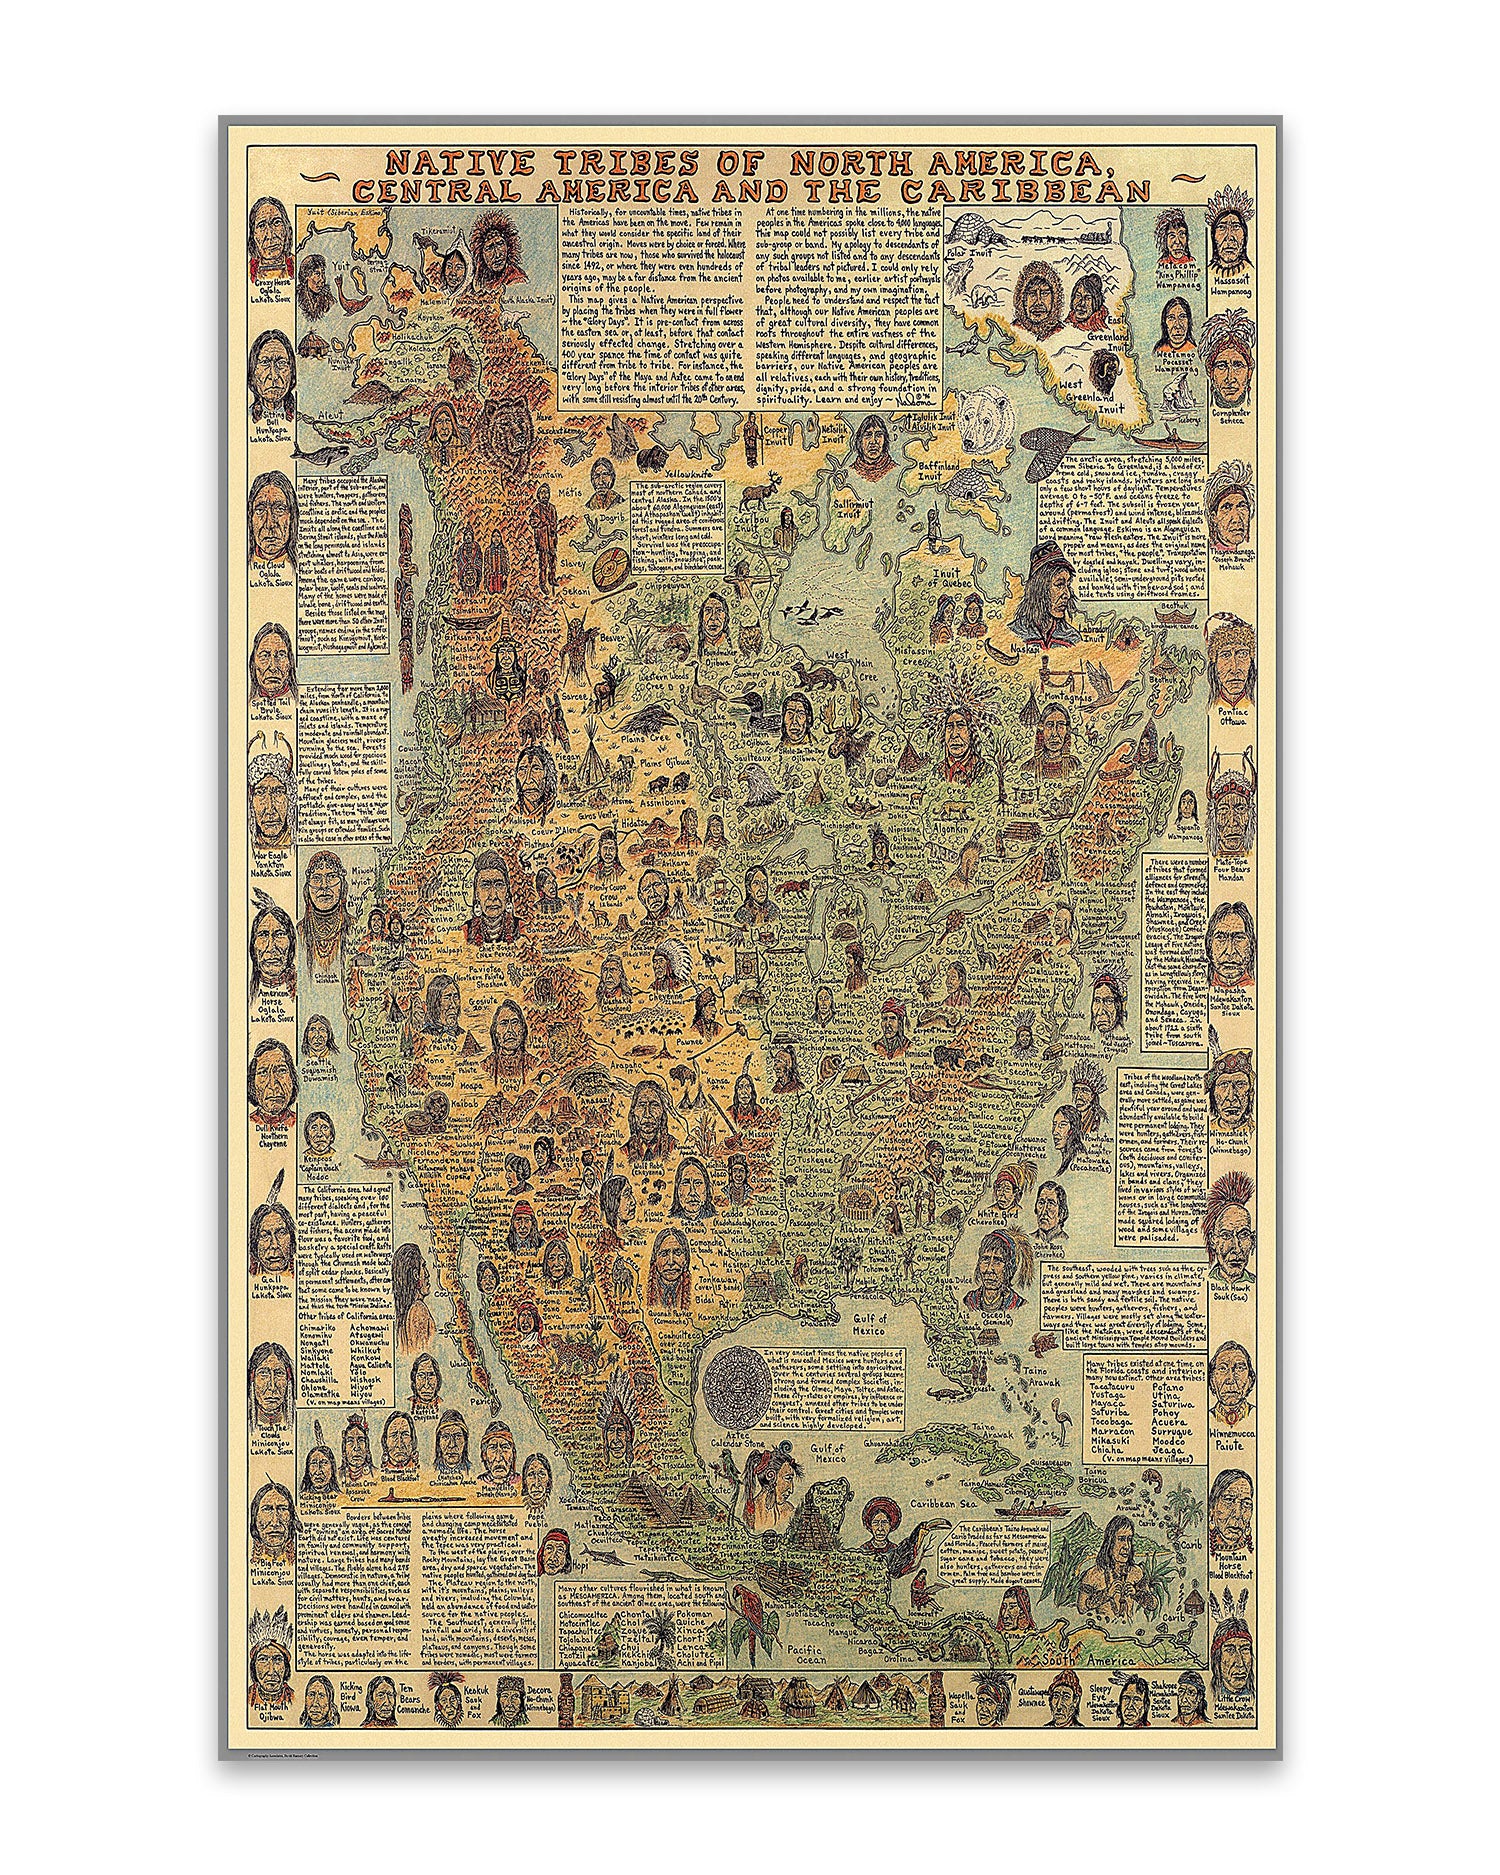 Native Tribes of North American central America and the Caribbean Maps Poster